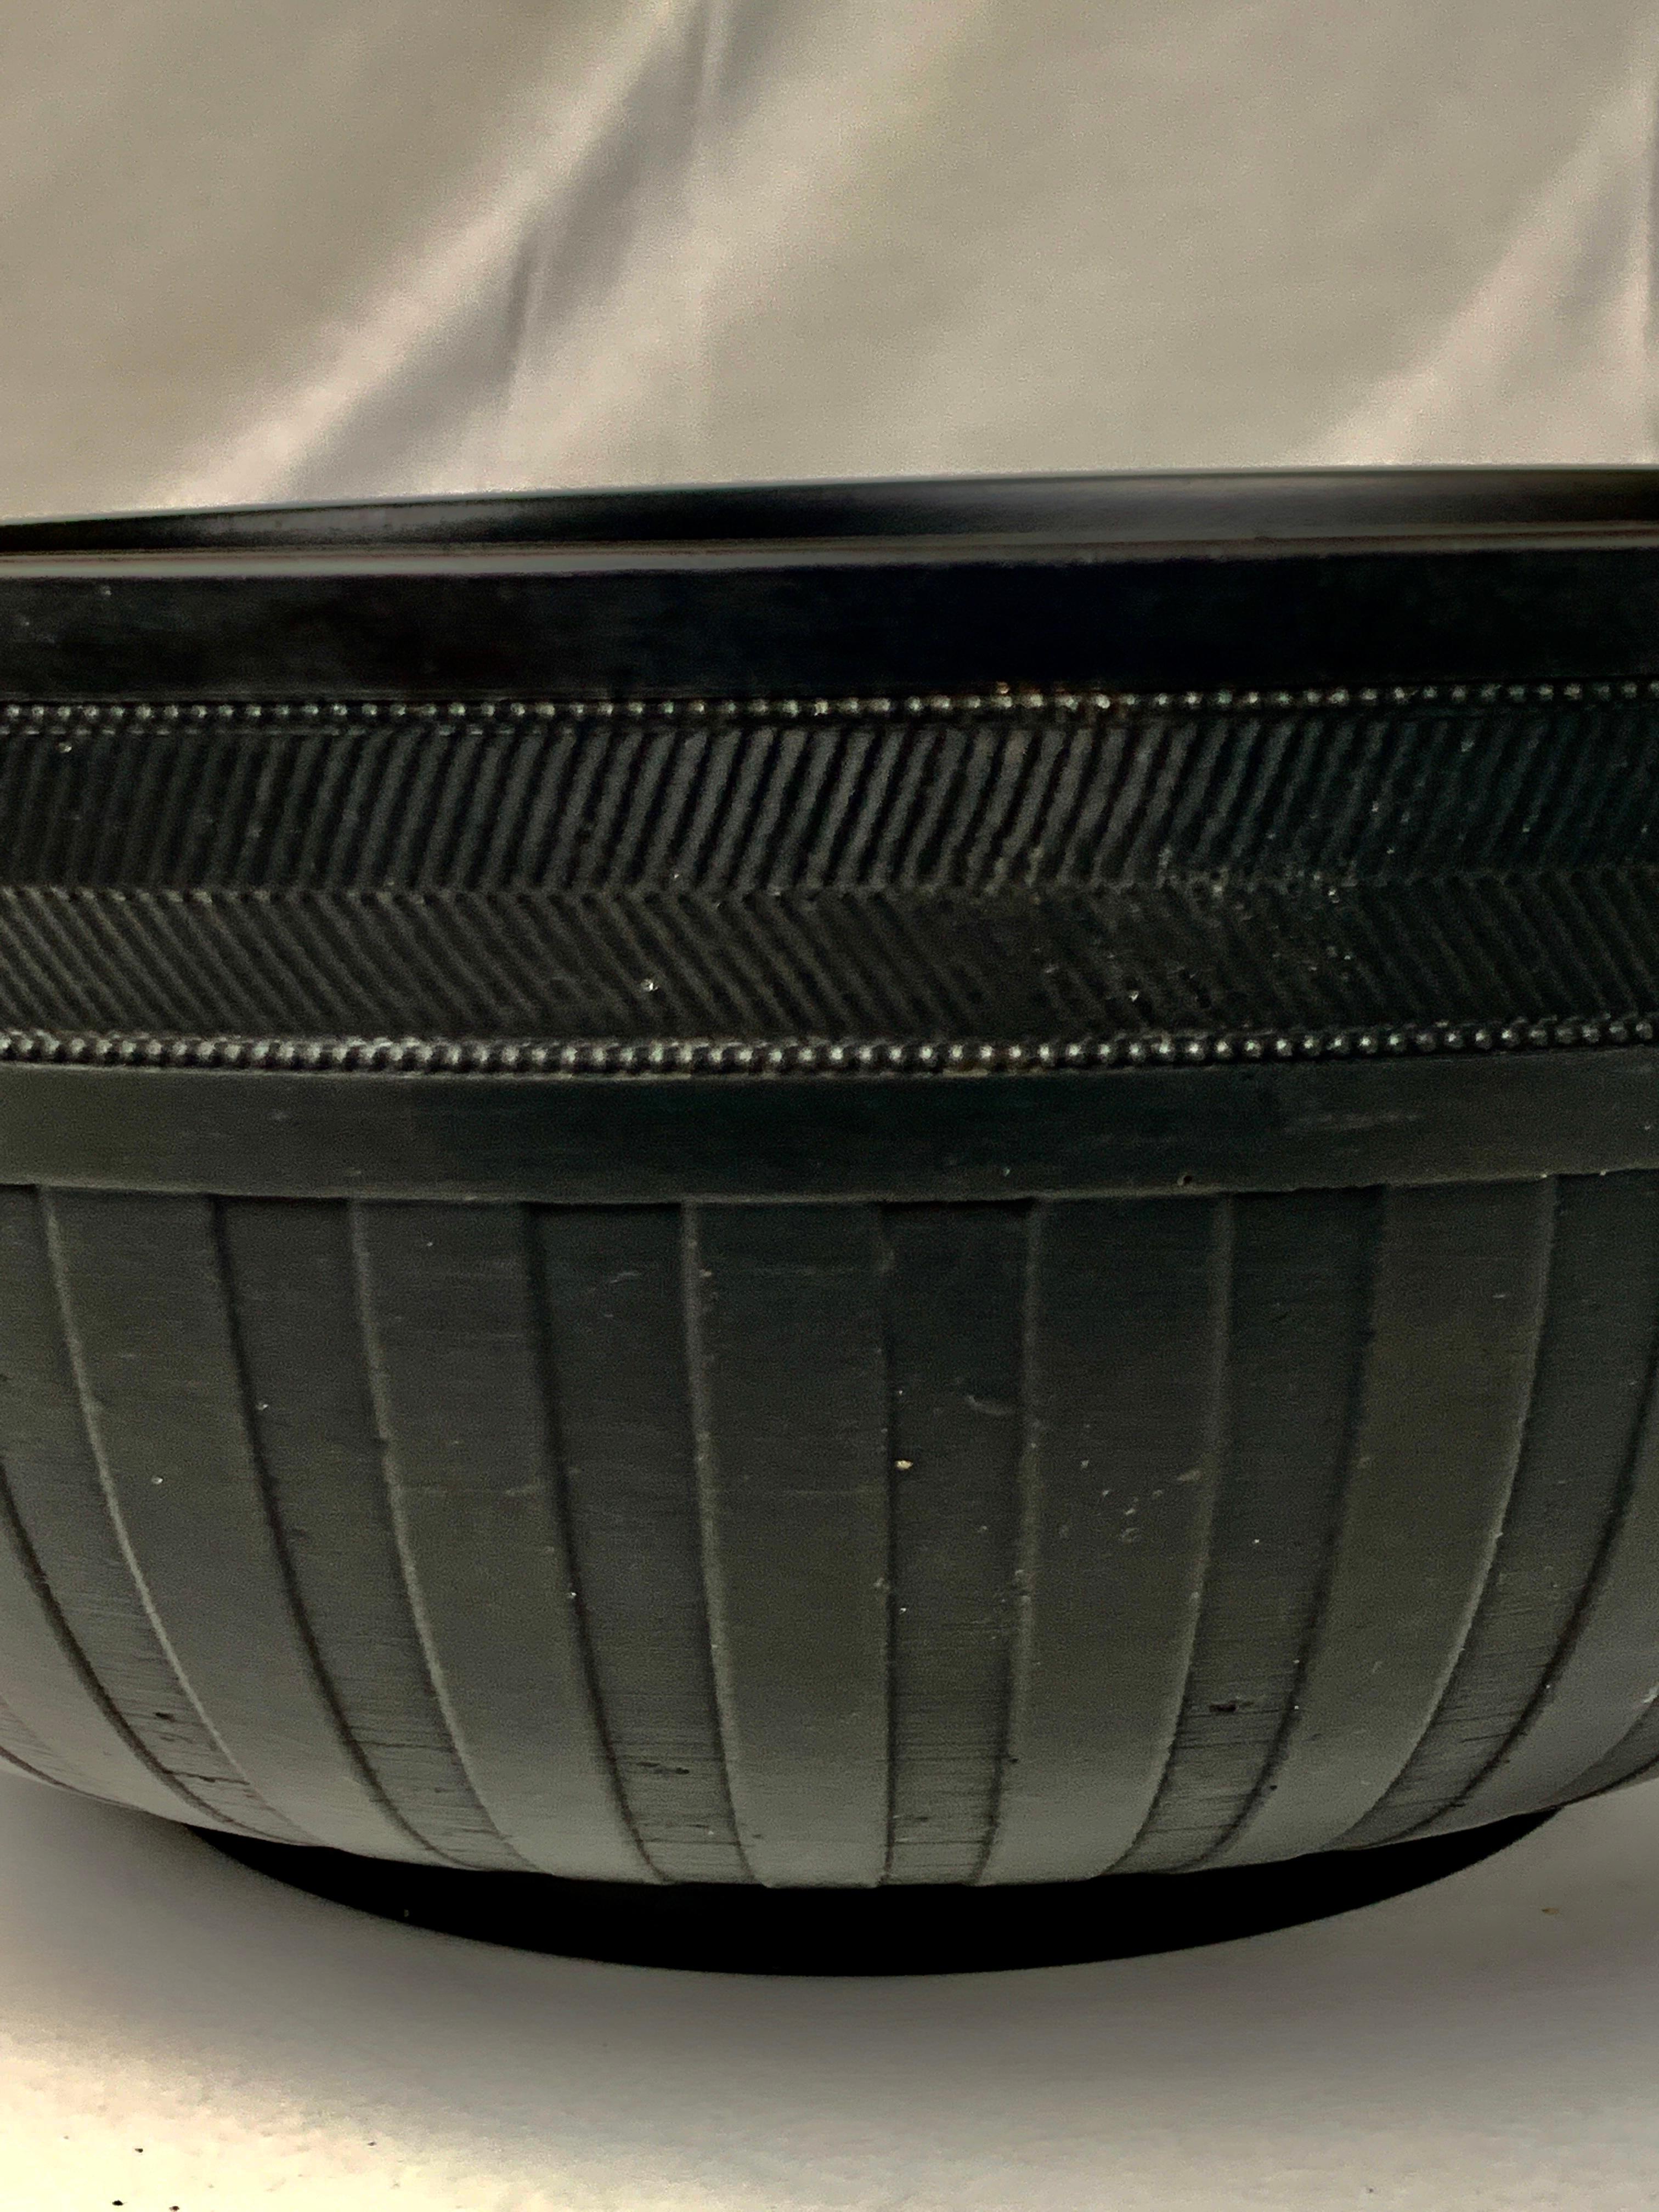 A large Wedgwood black basalt engine turned bowl decorated around the outside with a band of chevrons at the top and a band of broad vertical cuts below that. The verticle cuts reach all the way to the bottom of the bowl. They are deep enough that